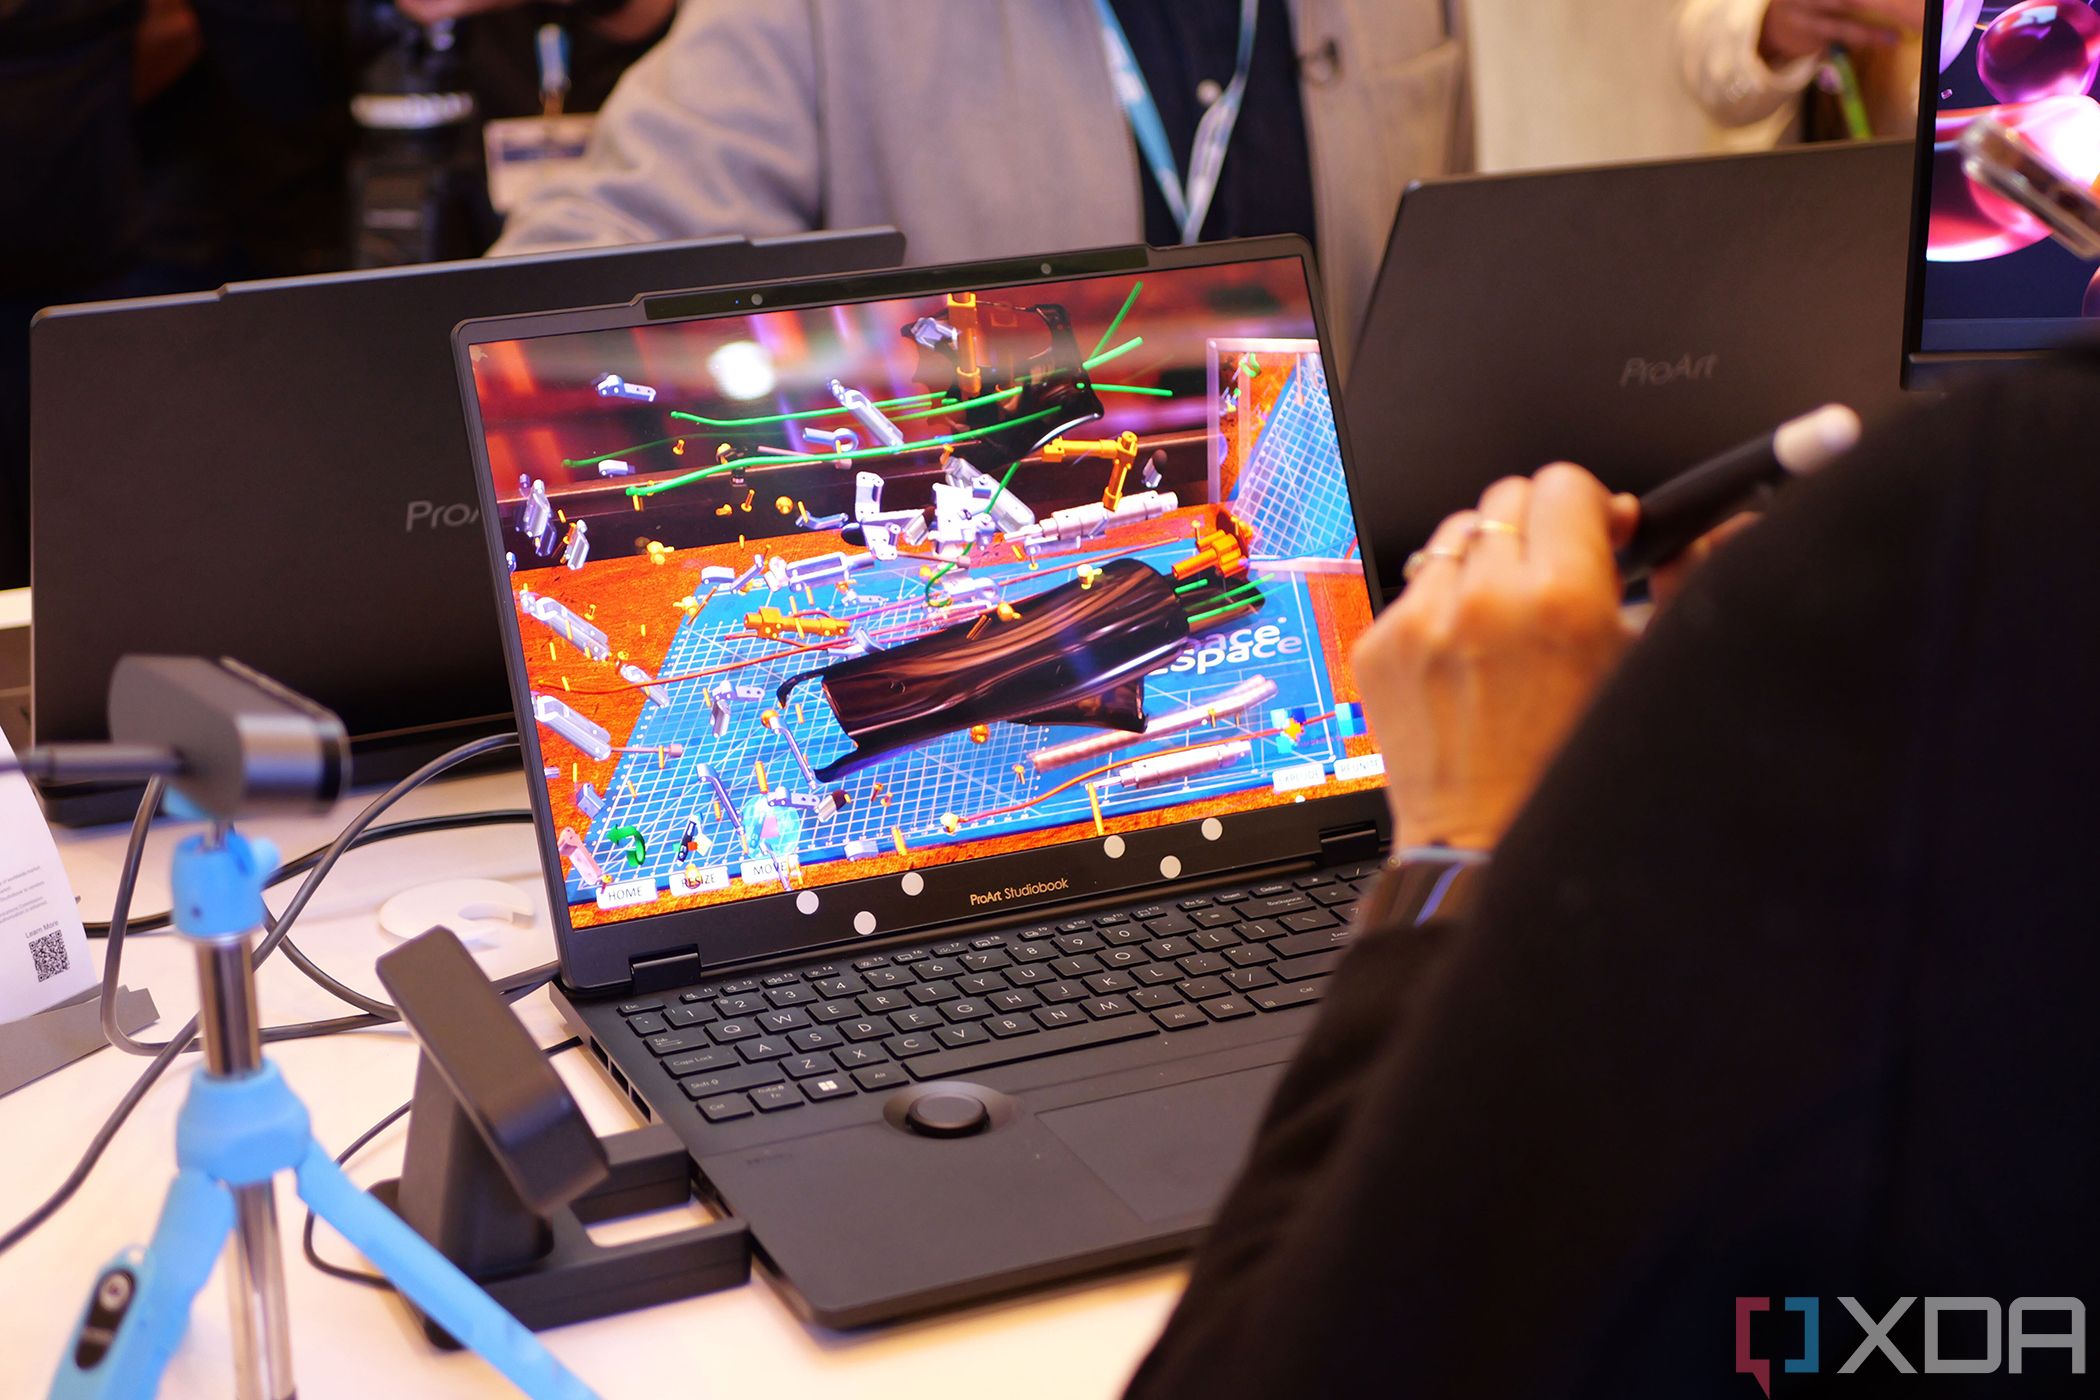 The Lenovo Yoga Book 9i is a beautiful dual-screen laptop for